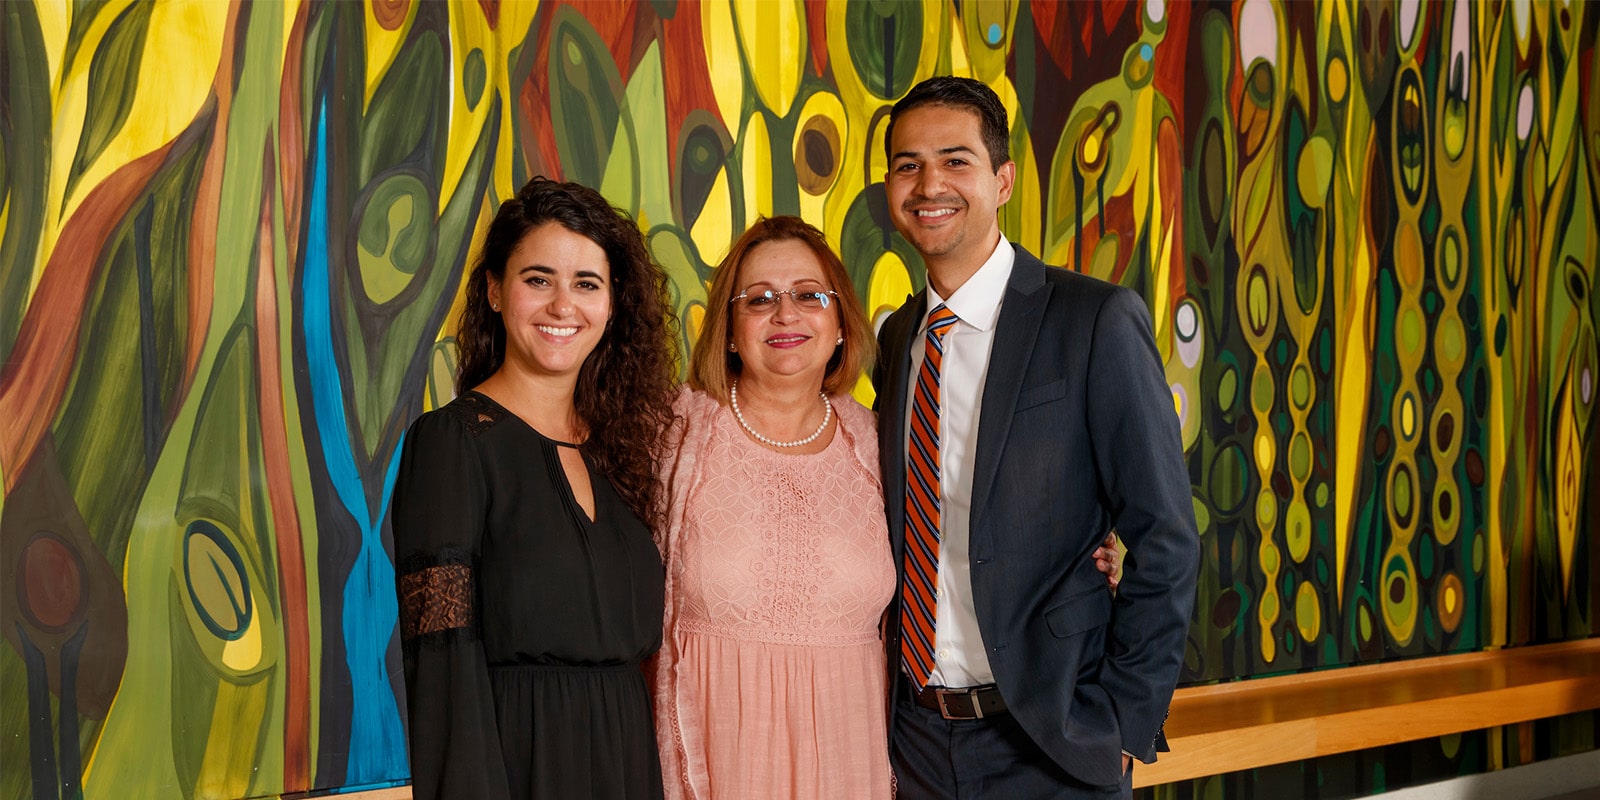 Jorge Soriano with his wife, Hilary, and mother